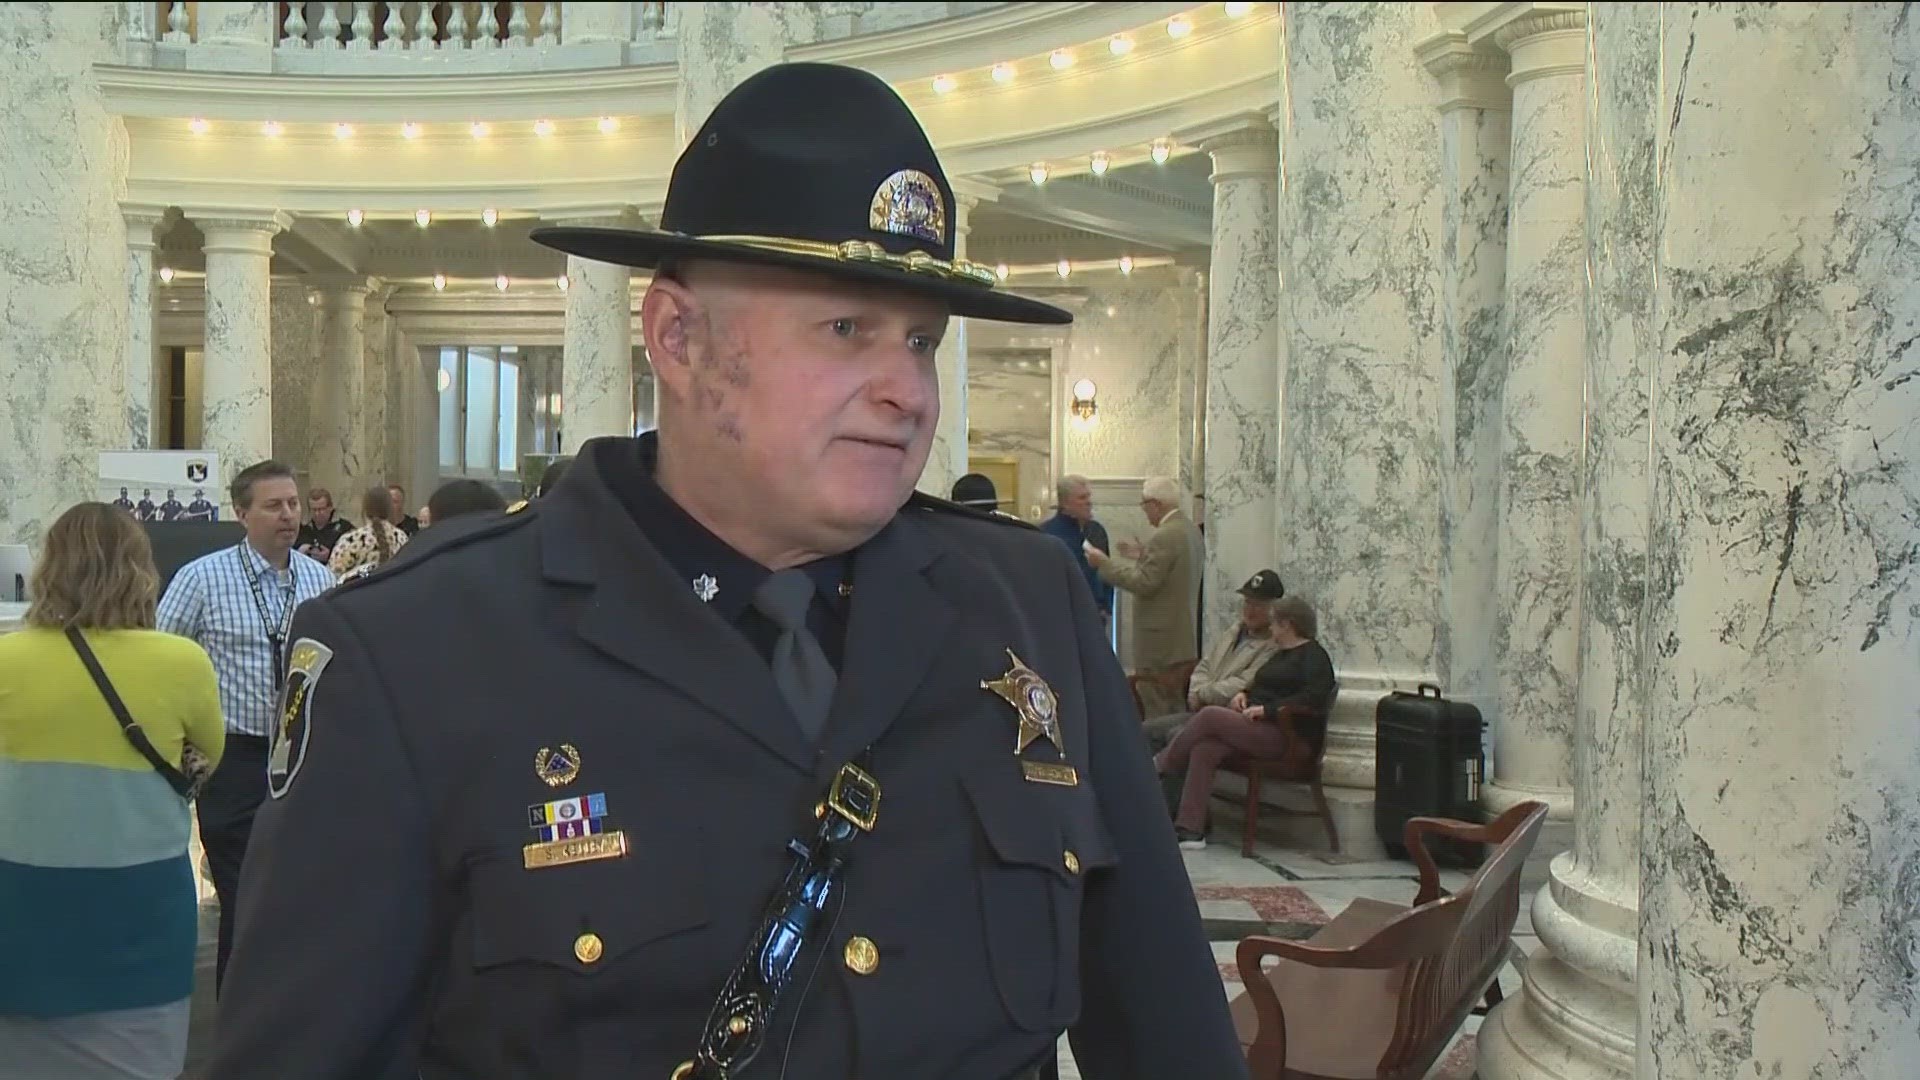 ISP held a celebration at the Idaho State Capitol honoring those who served and shared plans for the future.